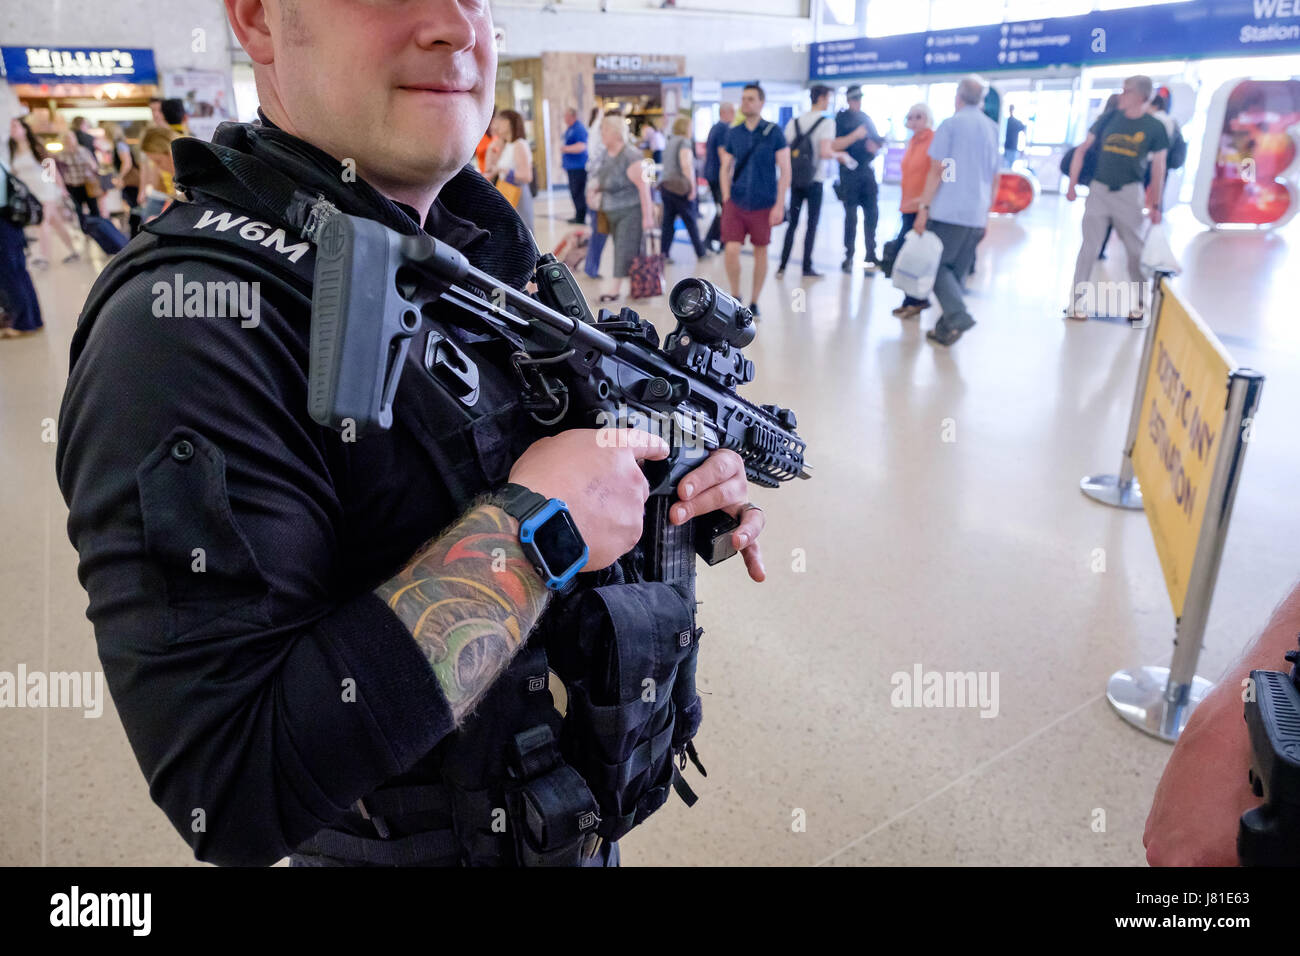 Armed Police patrol Leeds City Railway Station. West Yorkshire. UK. 26 May 2017. In the wake of the terrorist attack in Manchester, armed officers from the UK's Civil Nuclear Constabulary (CNC) have been deployed to support local armed police in the north of England. The usual role of the CNC is to provide armed policing and security for UK civil nuclear establishments. Here CNC officers are seen patrolling with officers of the West Yorkshire Police Firearms Support Unit at Leeds City train station. Credit: Ian Wray/Alamy Live News Stock Photo